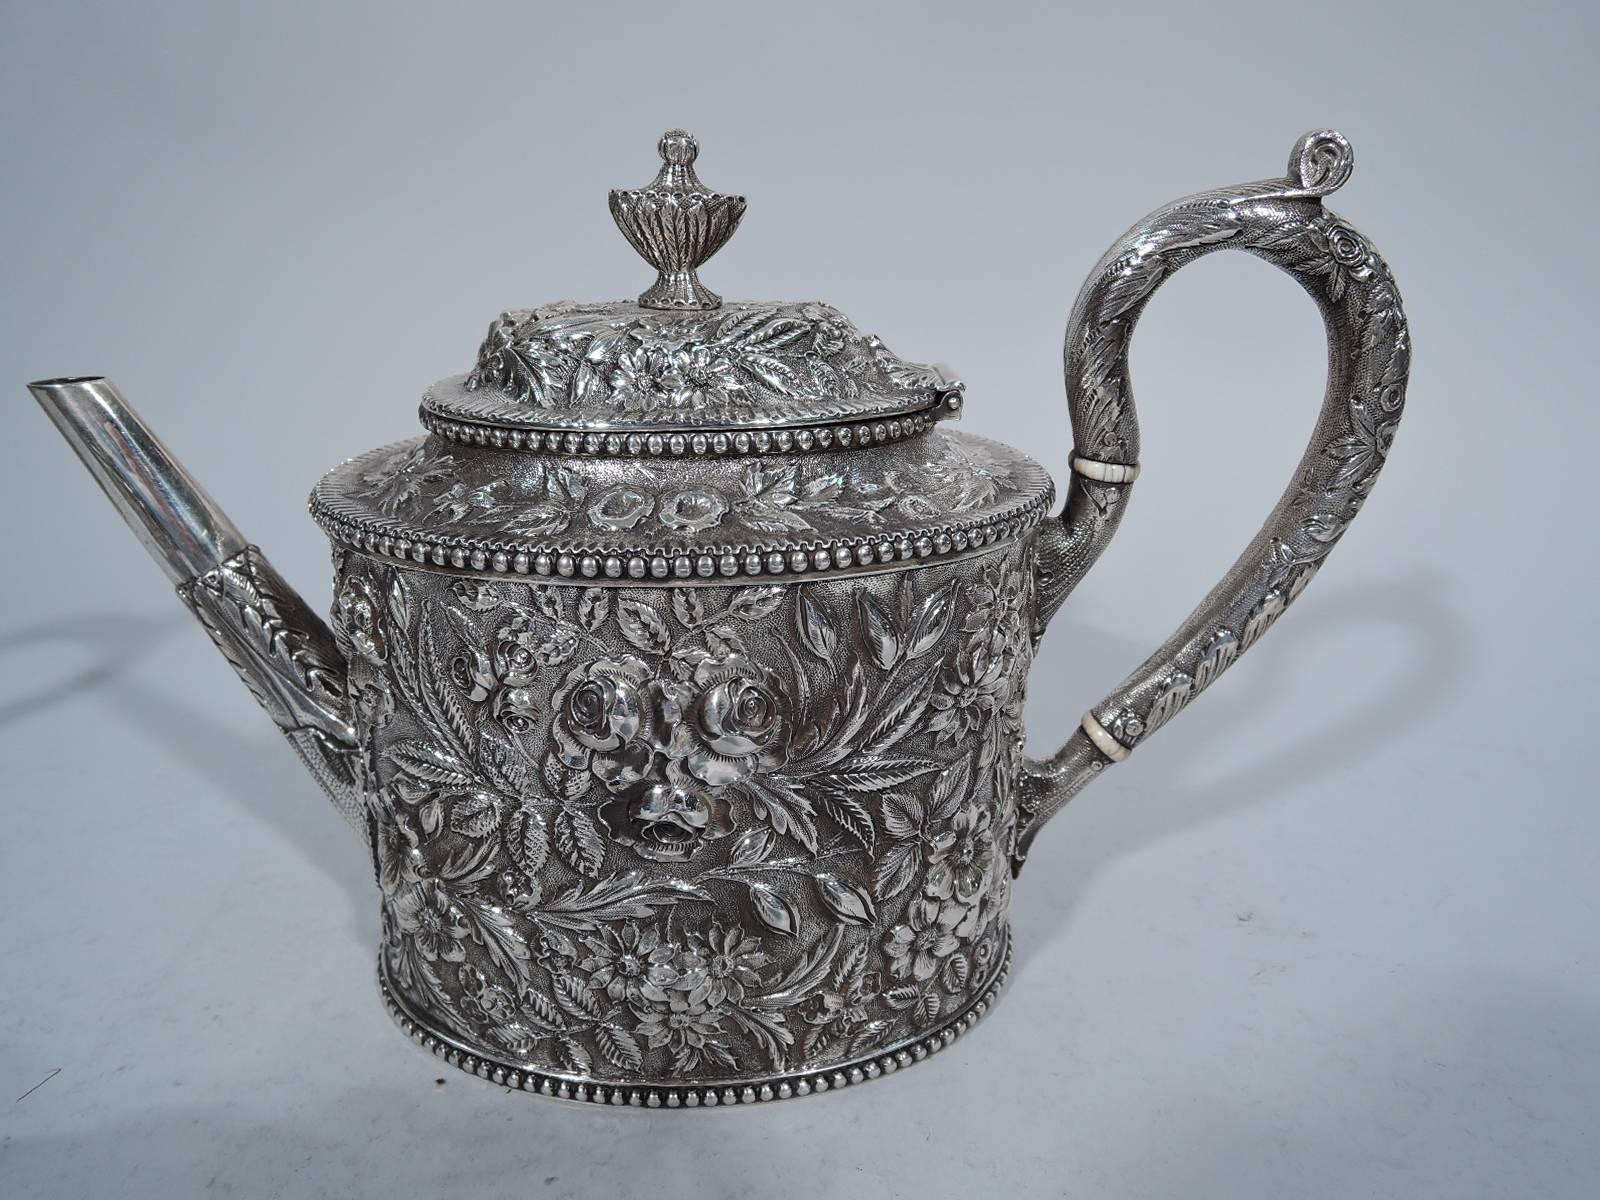 Sterling silver tea set. Made by Jacobi & Jenkins in Baltimore, circa 1900. This set comprises coffeepot with hinged cover, teapot with hinged cover, creamer, and sugar with cover.

Each: Ovoid body. All covers domed with vase finial. All handles